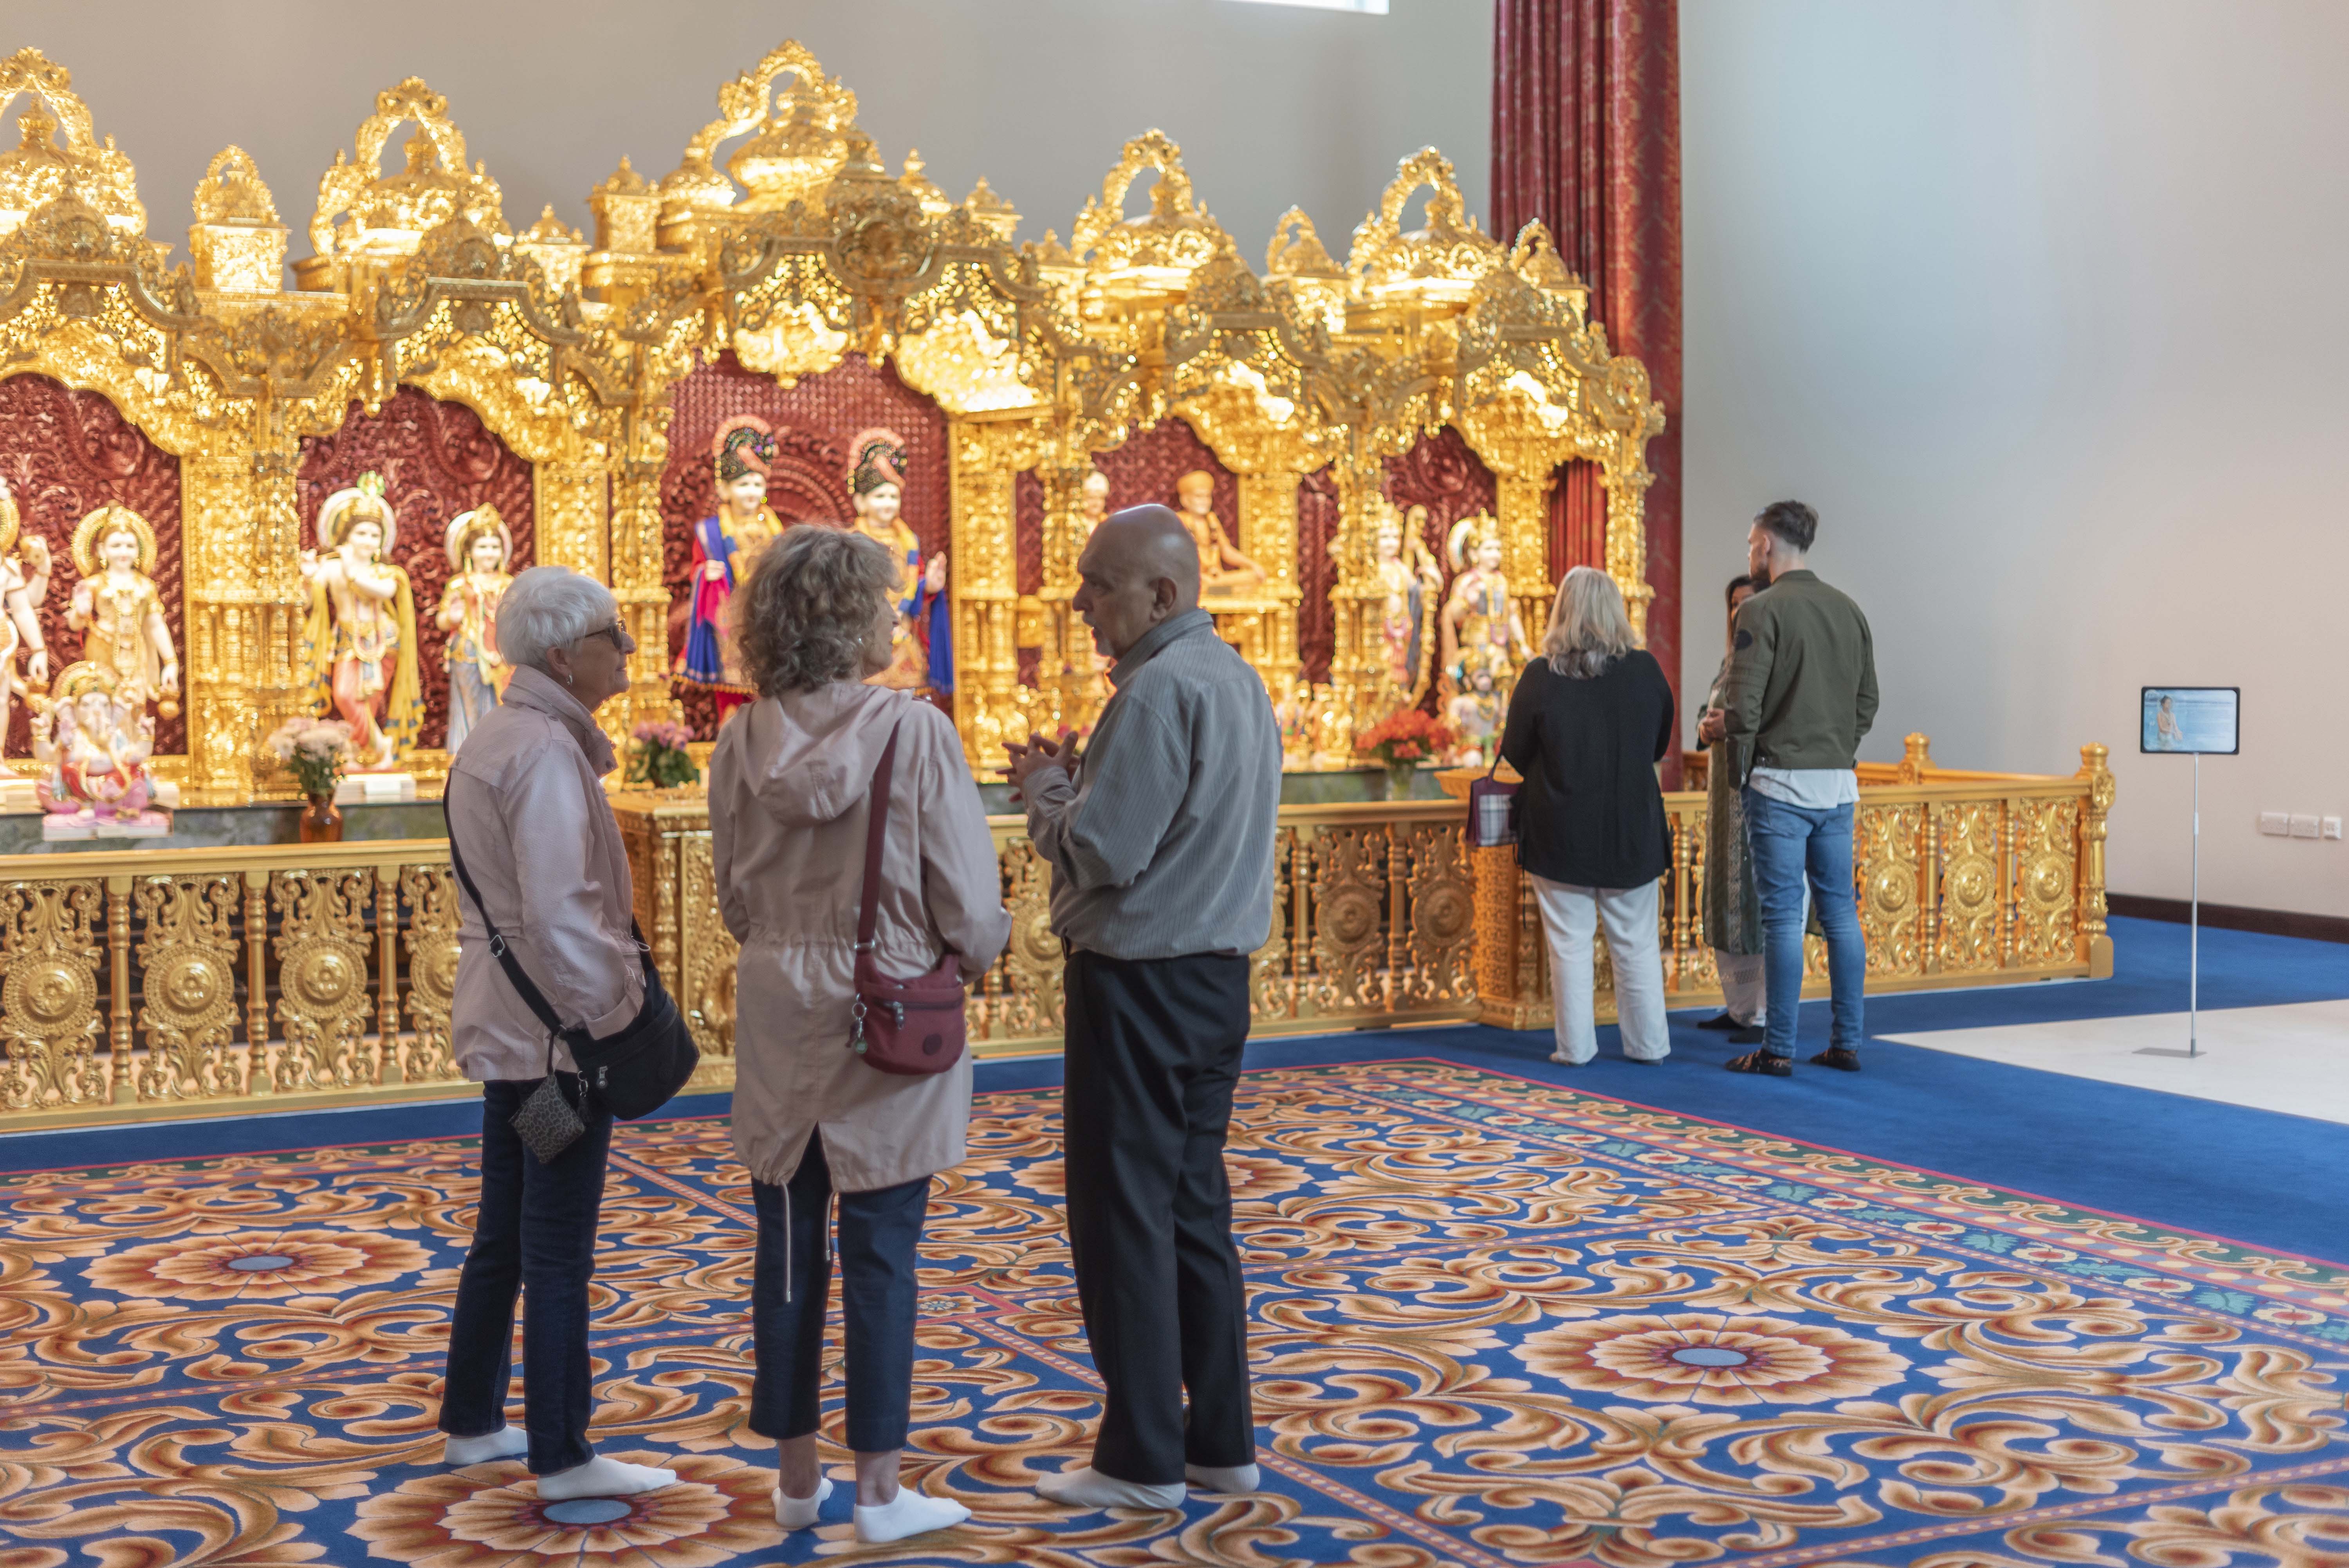 Two small groups of people in a large room with brightly patterned carpet and golden shrine at one end.